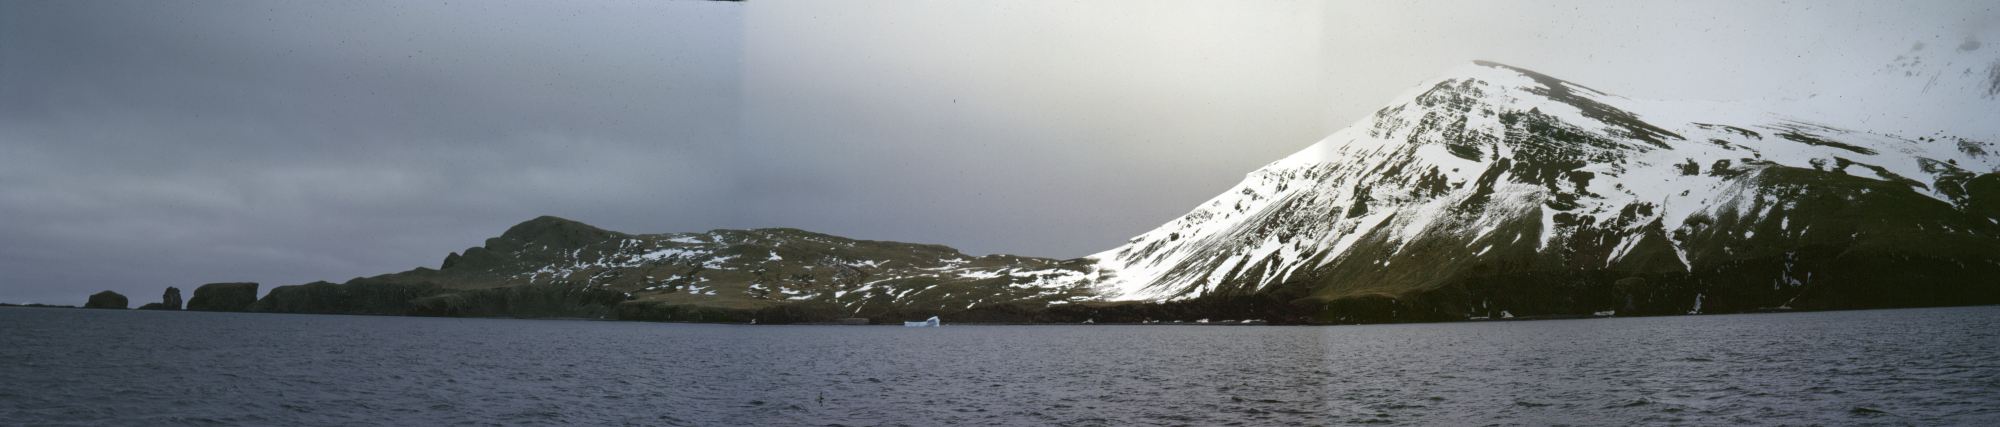 View of the north-east coast of Annenkov Island from the deck of the RRS John Biscoe, 14th November 1972.